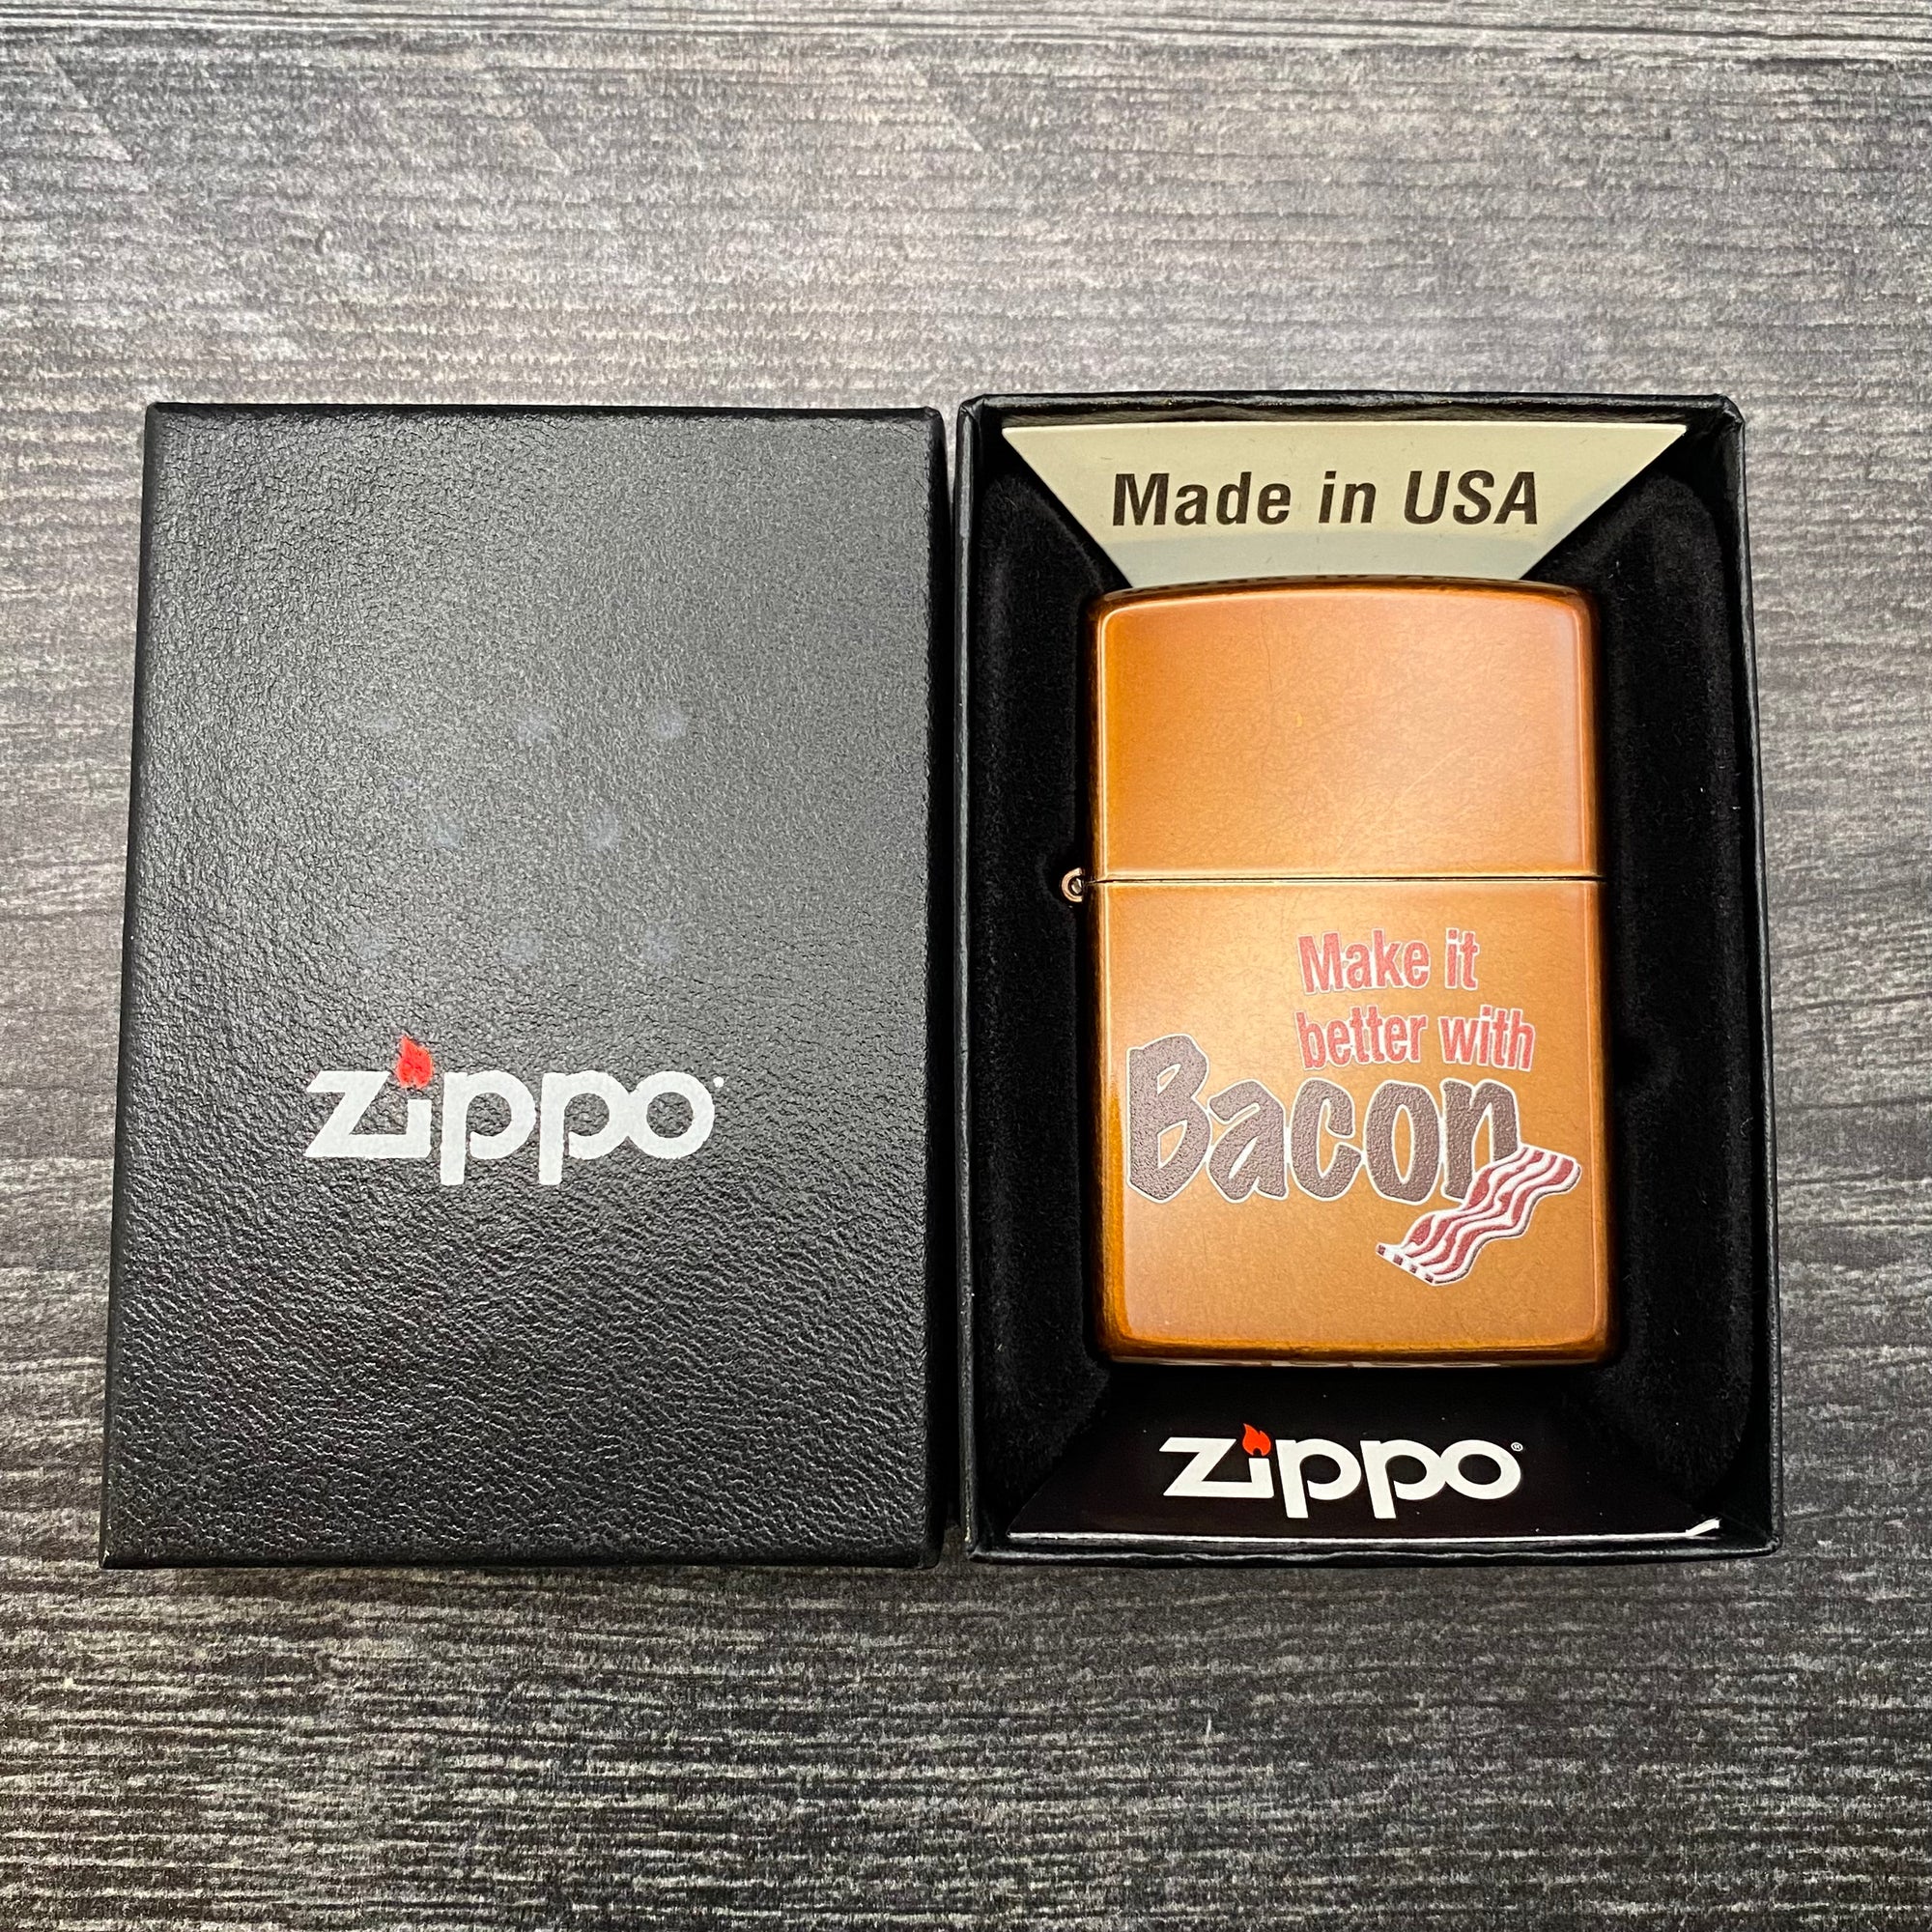 EXCLUSIVE - RILEY'S 66 ZIPPO LIGHTER - Bacon - Toffee